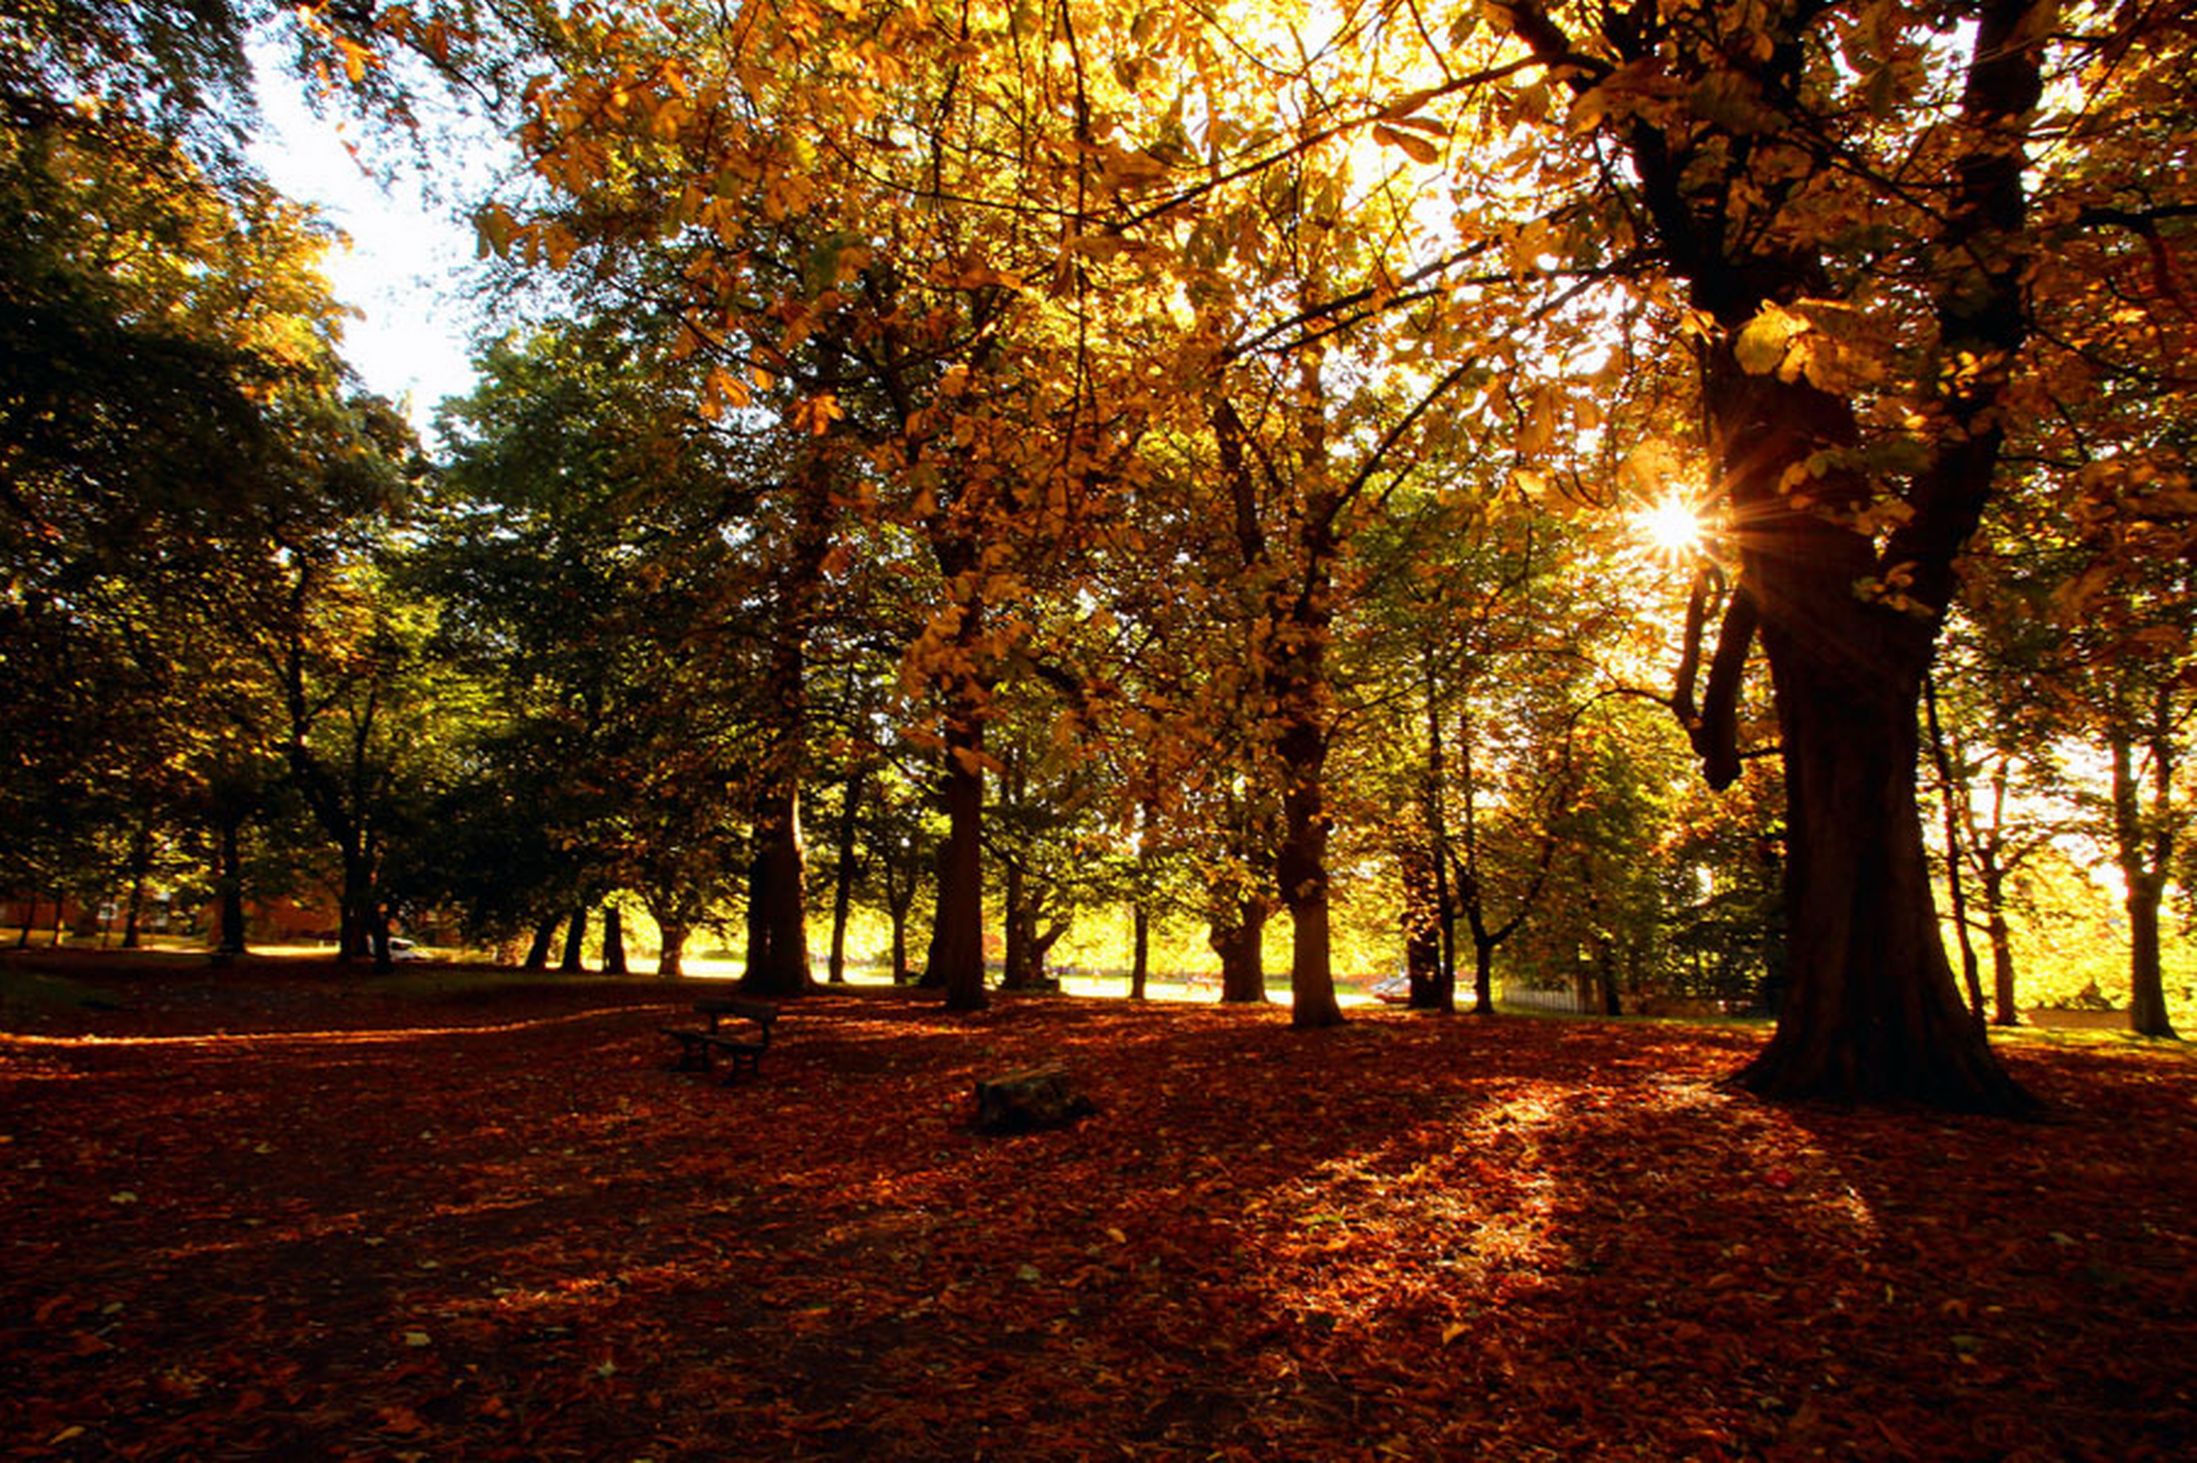 Sunshine-casts-shadows-from-the-trees-in-Sefton-Park-Liverpool-10th-October-2641157